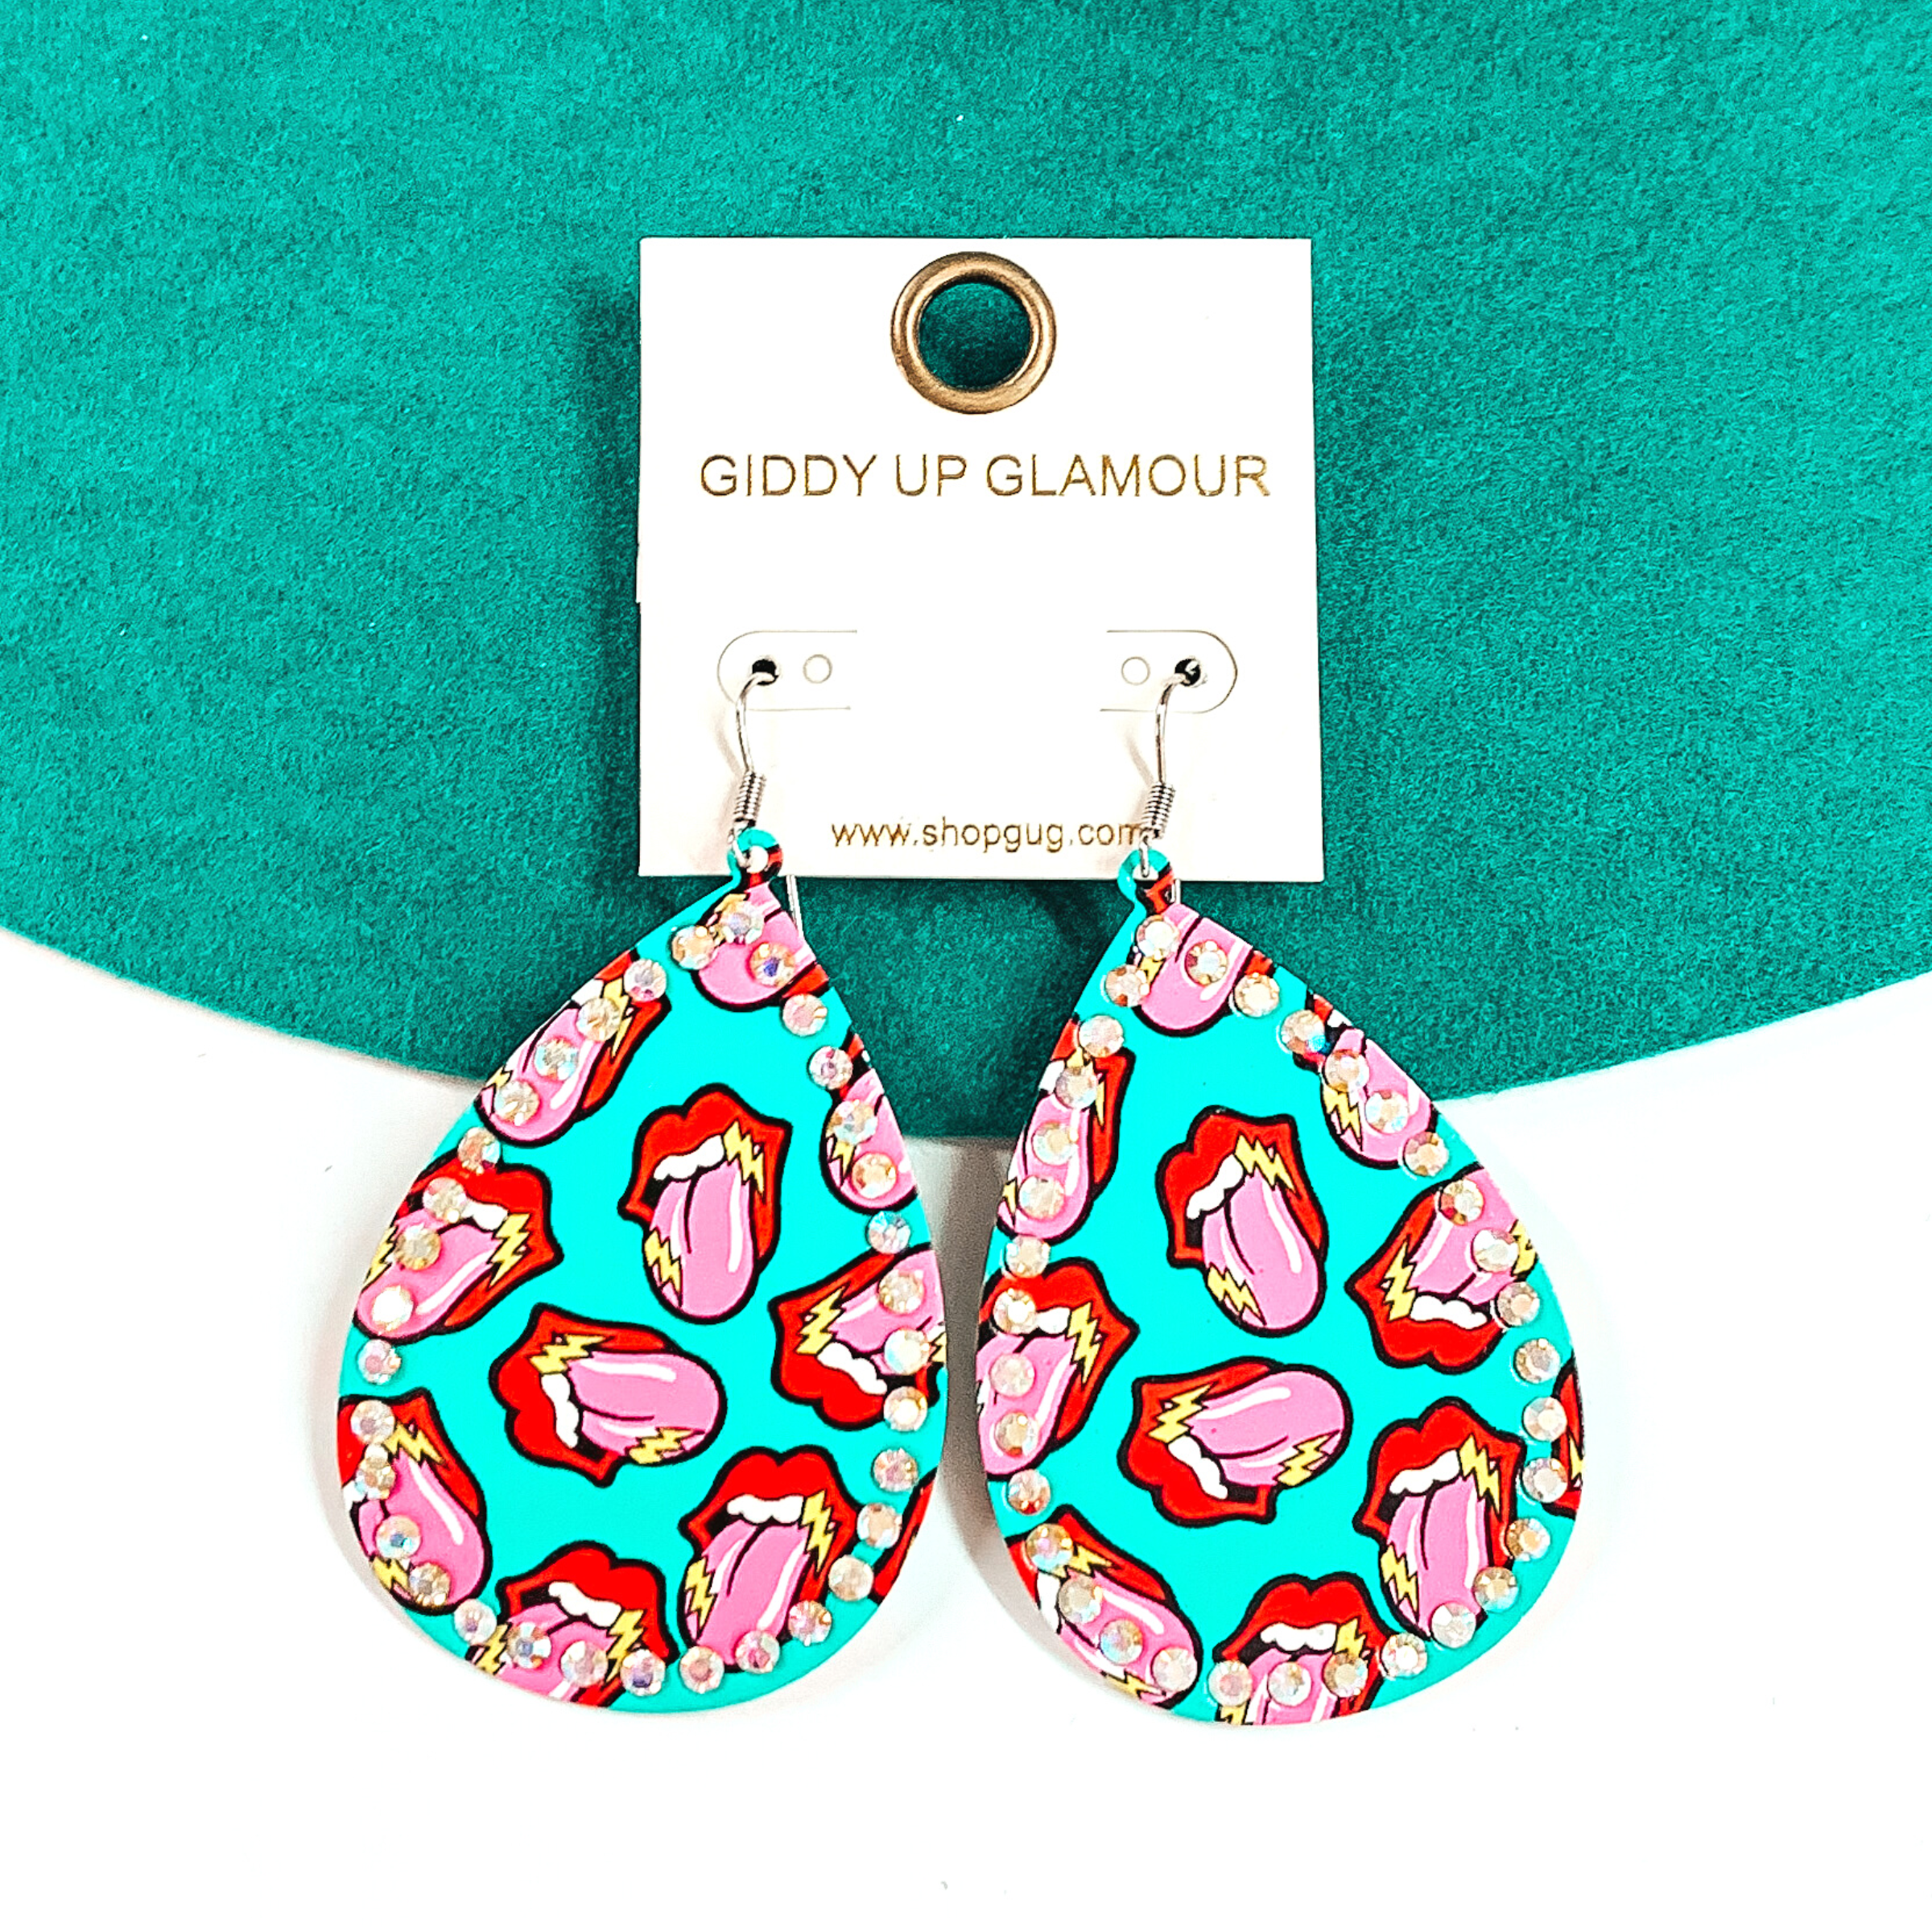 These are turquoise, teardrop, lip and tongue print earrings with ab crystal all around.  The lip is red with a pink tongue and yellow lightning bolts on each tongue and lip. These earrings are taken on a green-teal felt hat brim and on a white background.